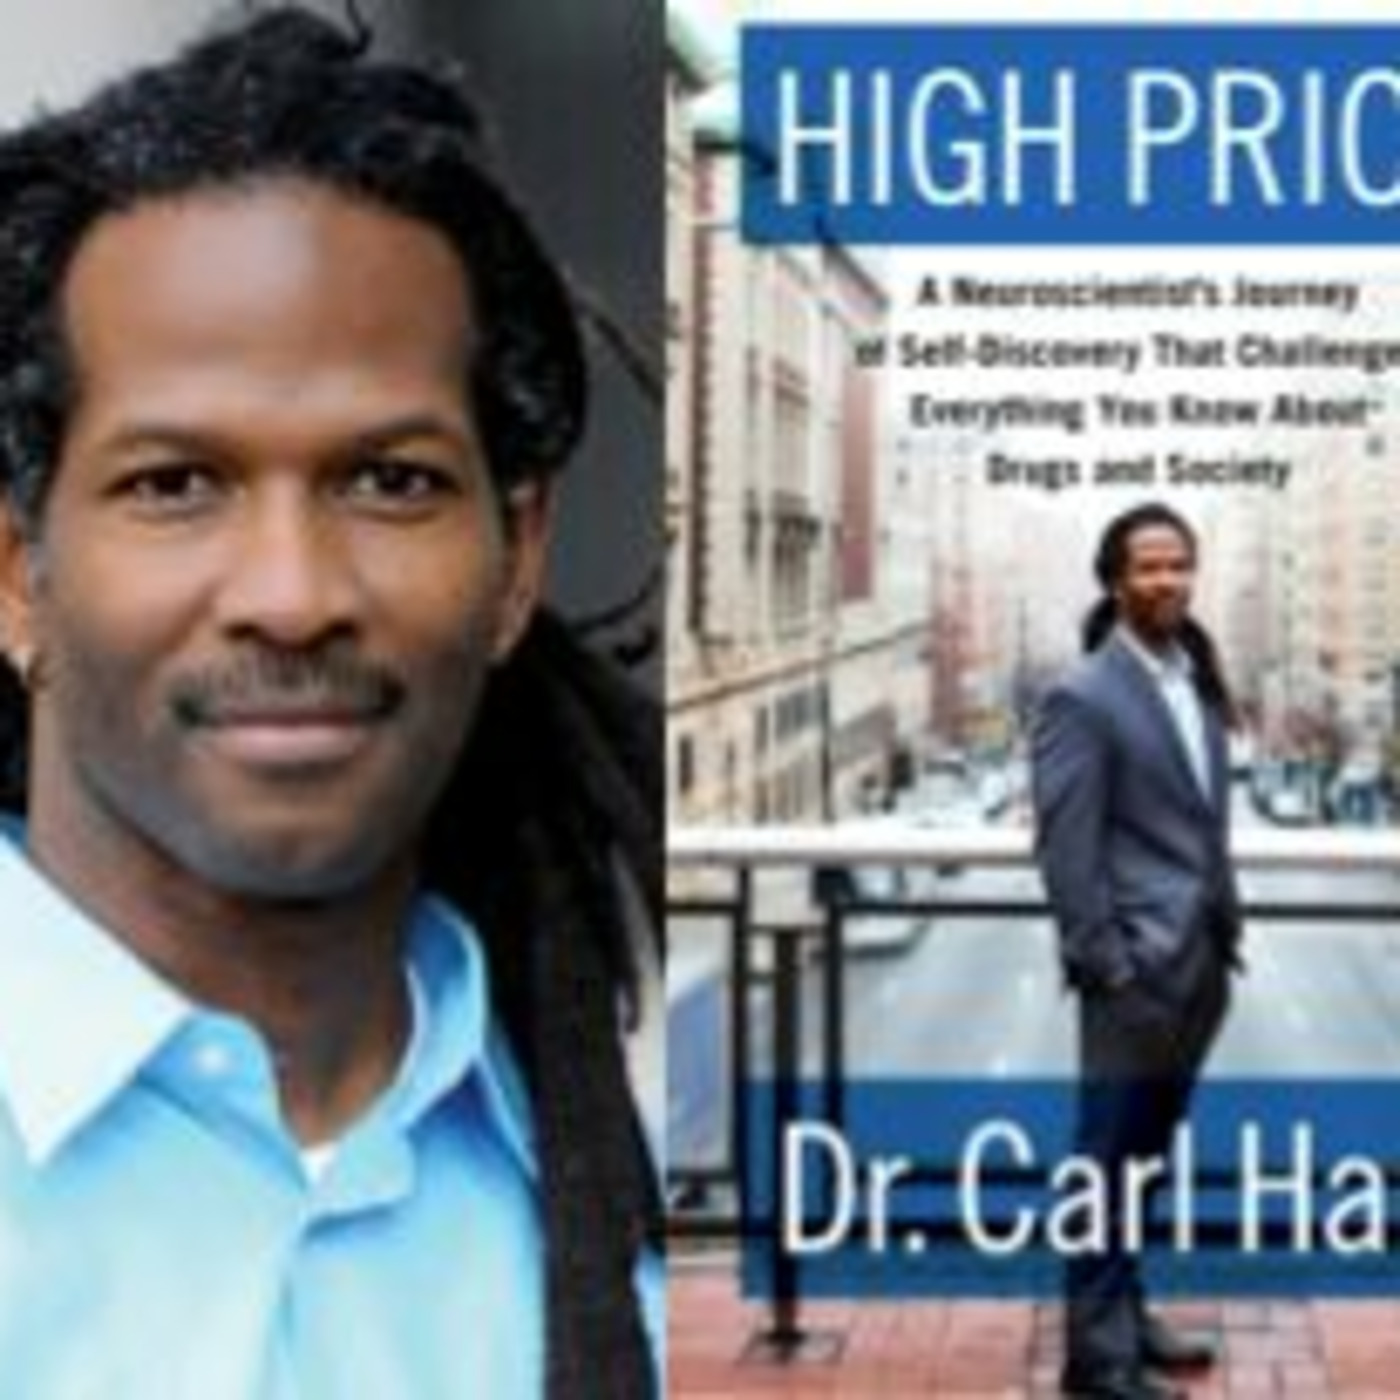 Free Forum Q&A -  CARL HART, Author of HIGH PRICE:  A Neuroscientist's Journey of Self-Discovery that Challenges Everything You Know about Drugs and Society